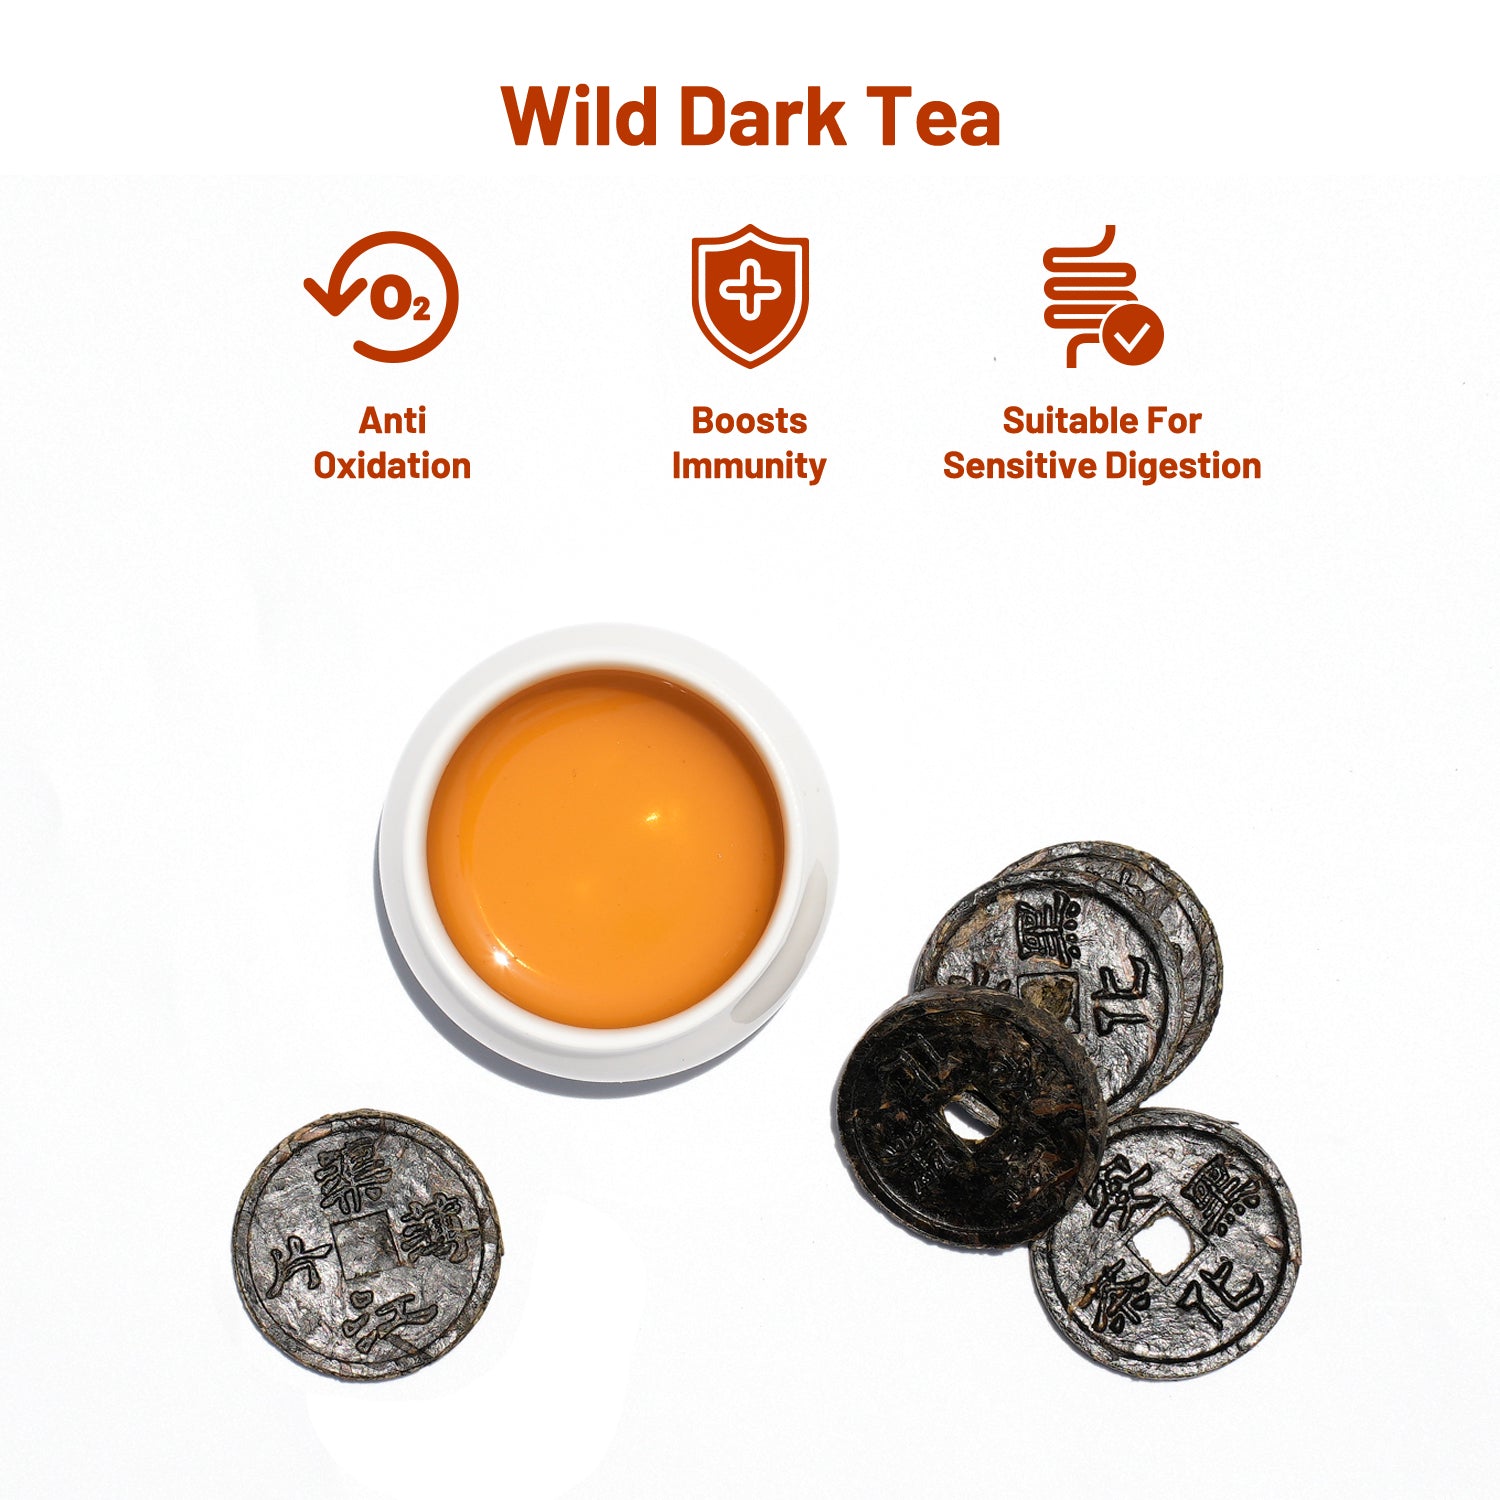 Chinese Wild Tea Sampler: 5 Flavors for $5 with Free Shipping